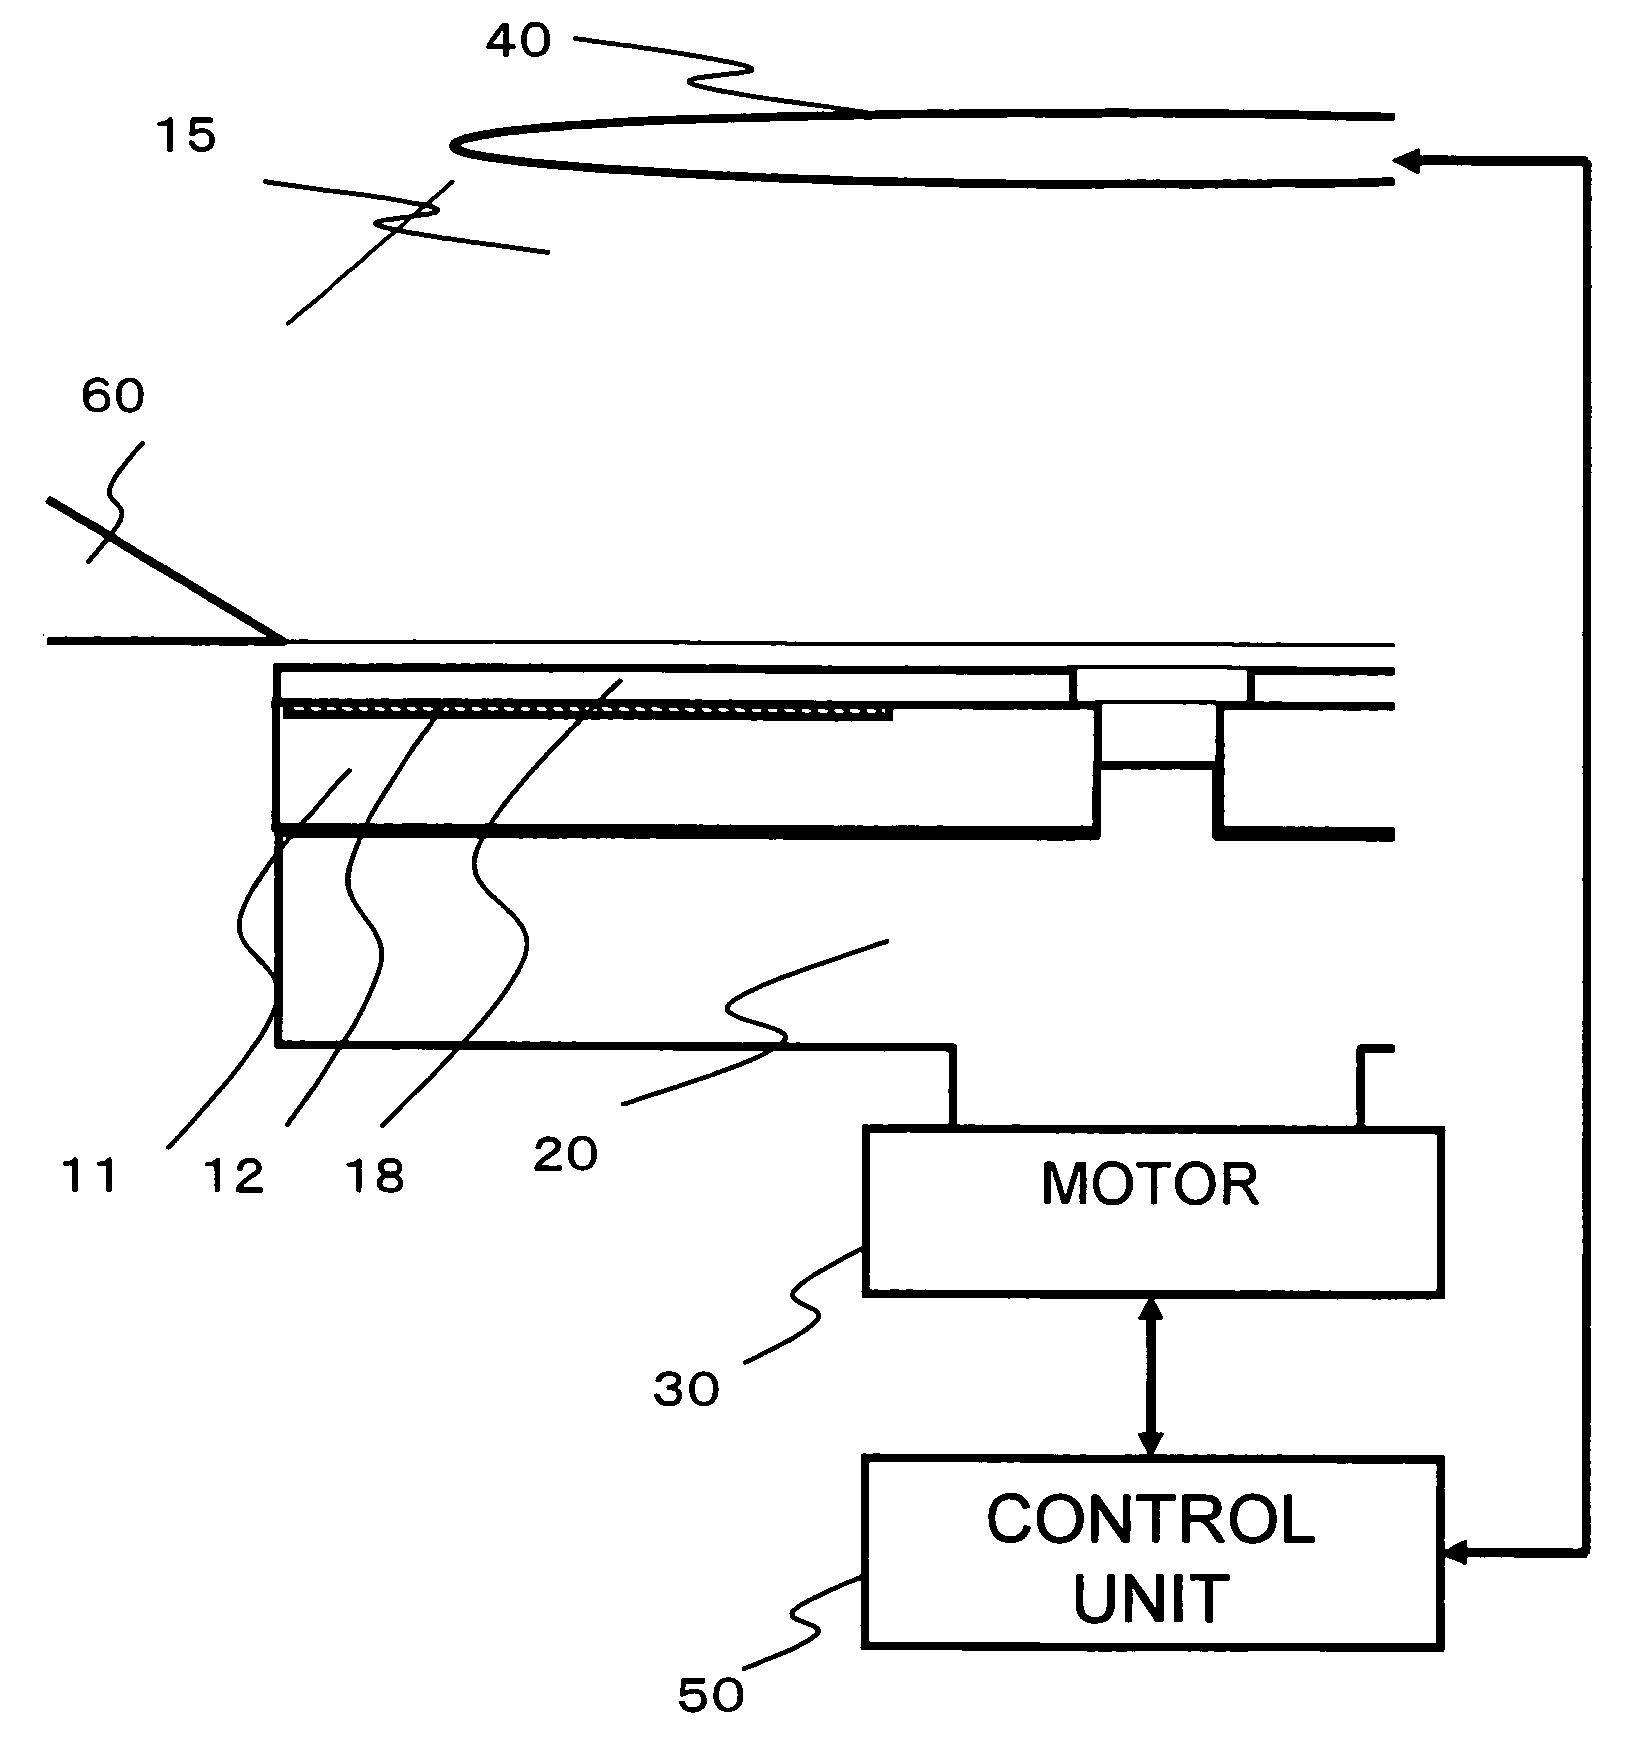 Manufacturing method and manufacturing apparatus for an optical data recording medium, and an optical data recording medium